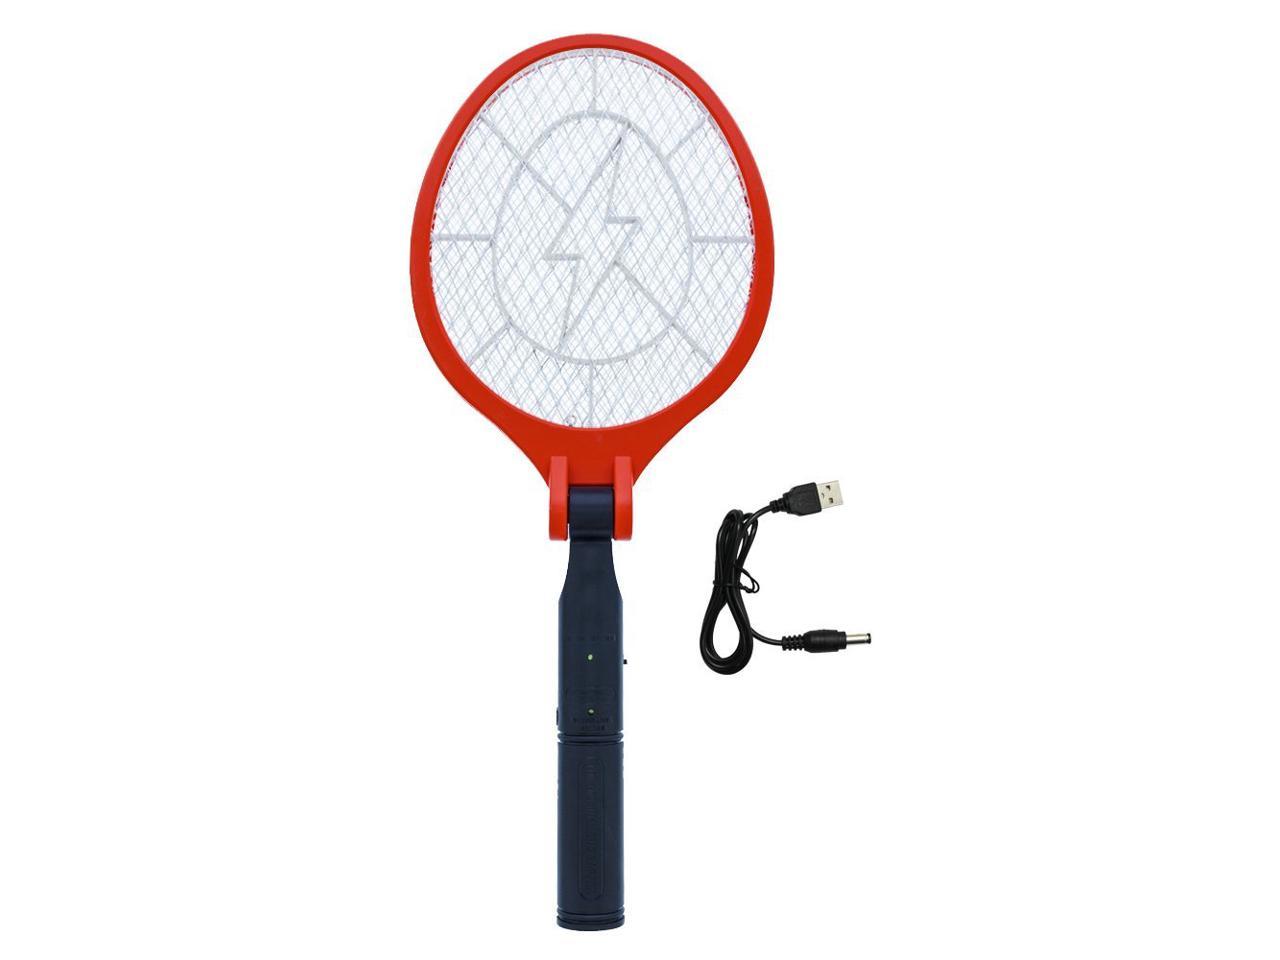 2W Electric Racket Fly Swatter Mosquito Insect Killer Rechargeable Free V4E2 